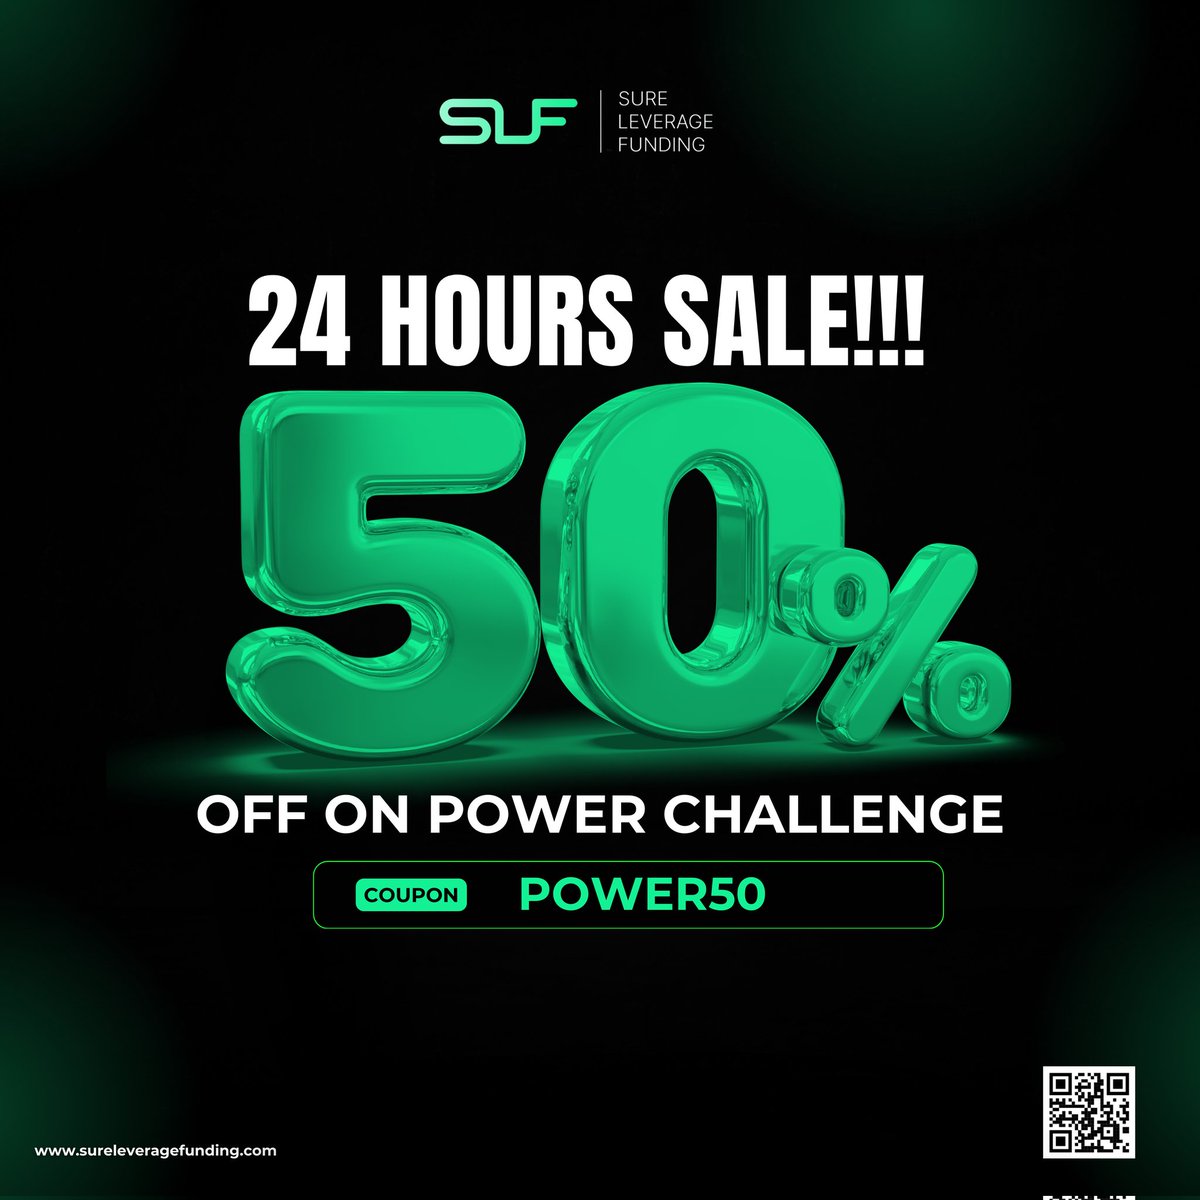 Unleash your power! ⚡ Don't miss out on our 24-hour sale with 50% off on Power Challenge. Use coupon code POWER50 before it's too late! 💥'
.
Visit: SureLeveragefunding.com